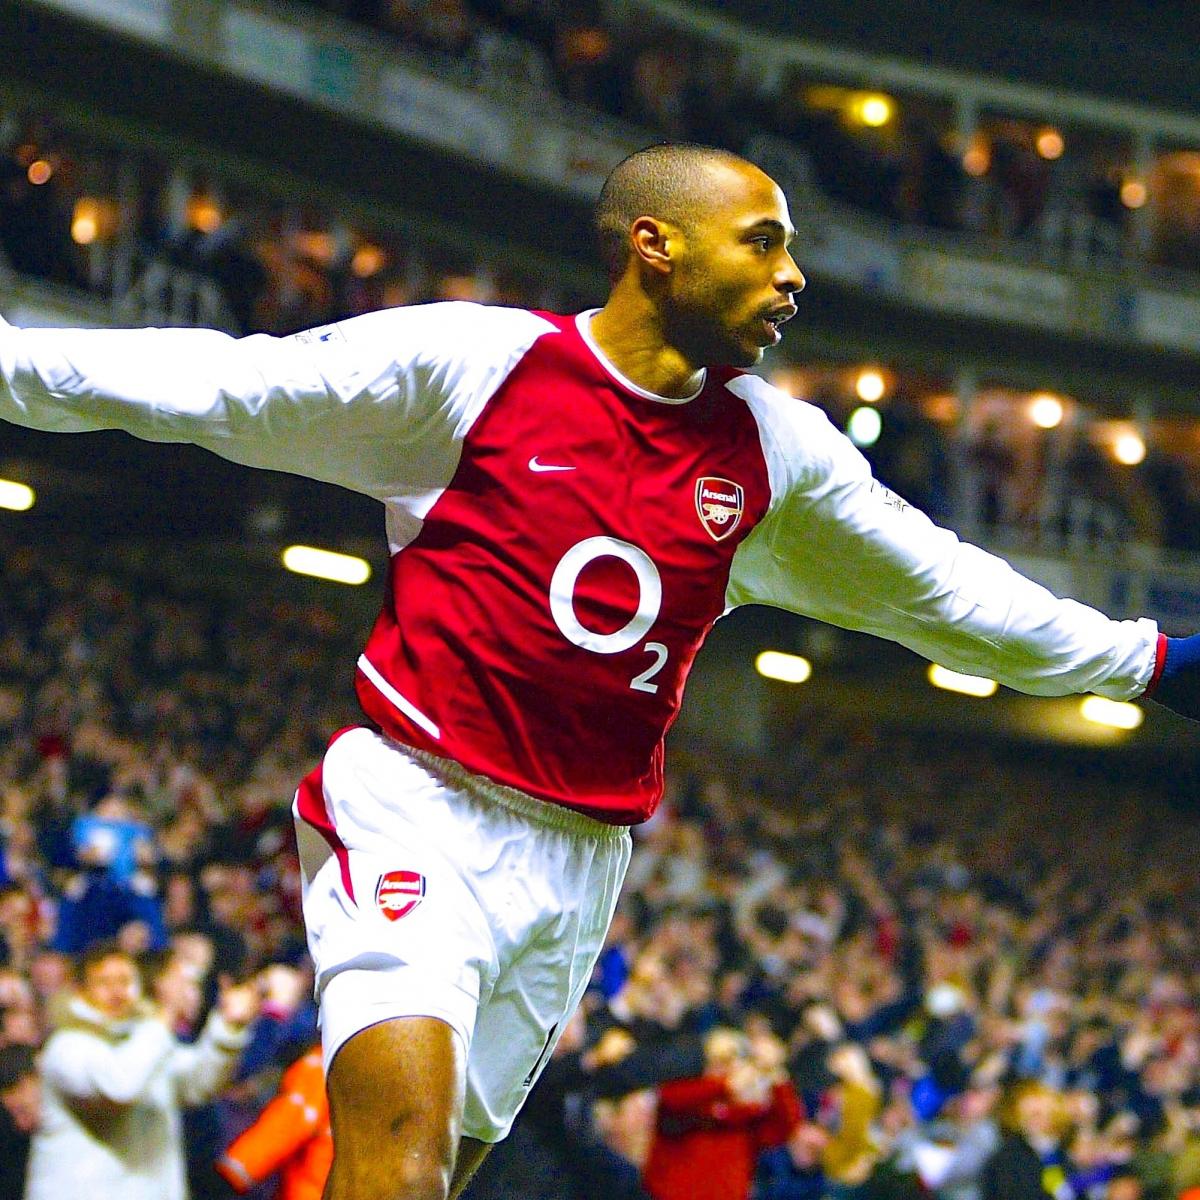 The 2006 World Cup All-Star Team included Arsenal legend Thierry Henry and  football's 'King of Cool